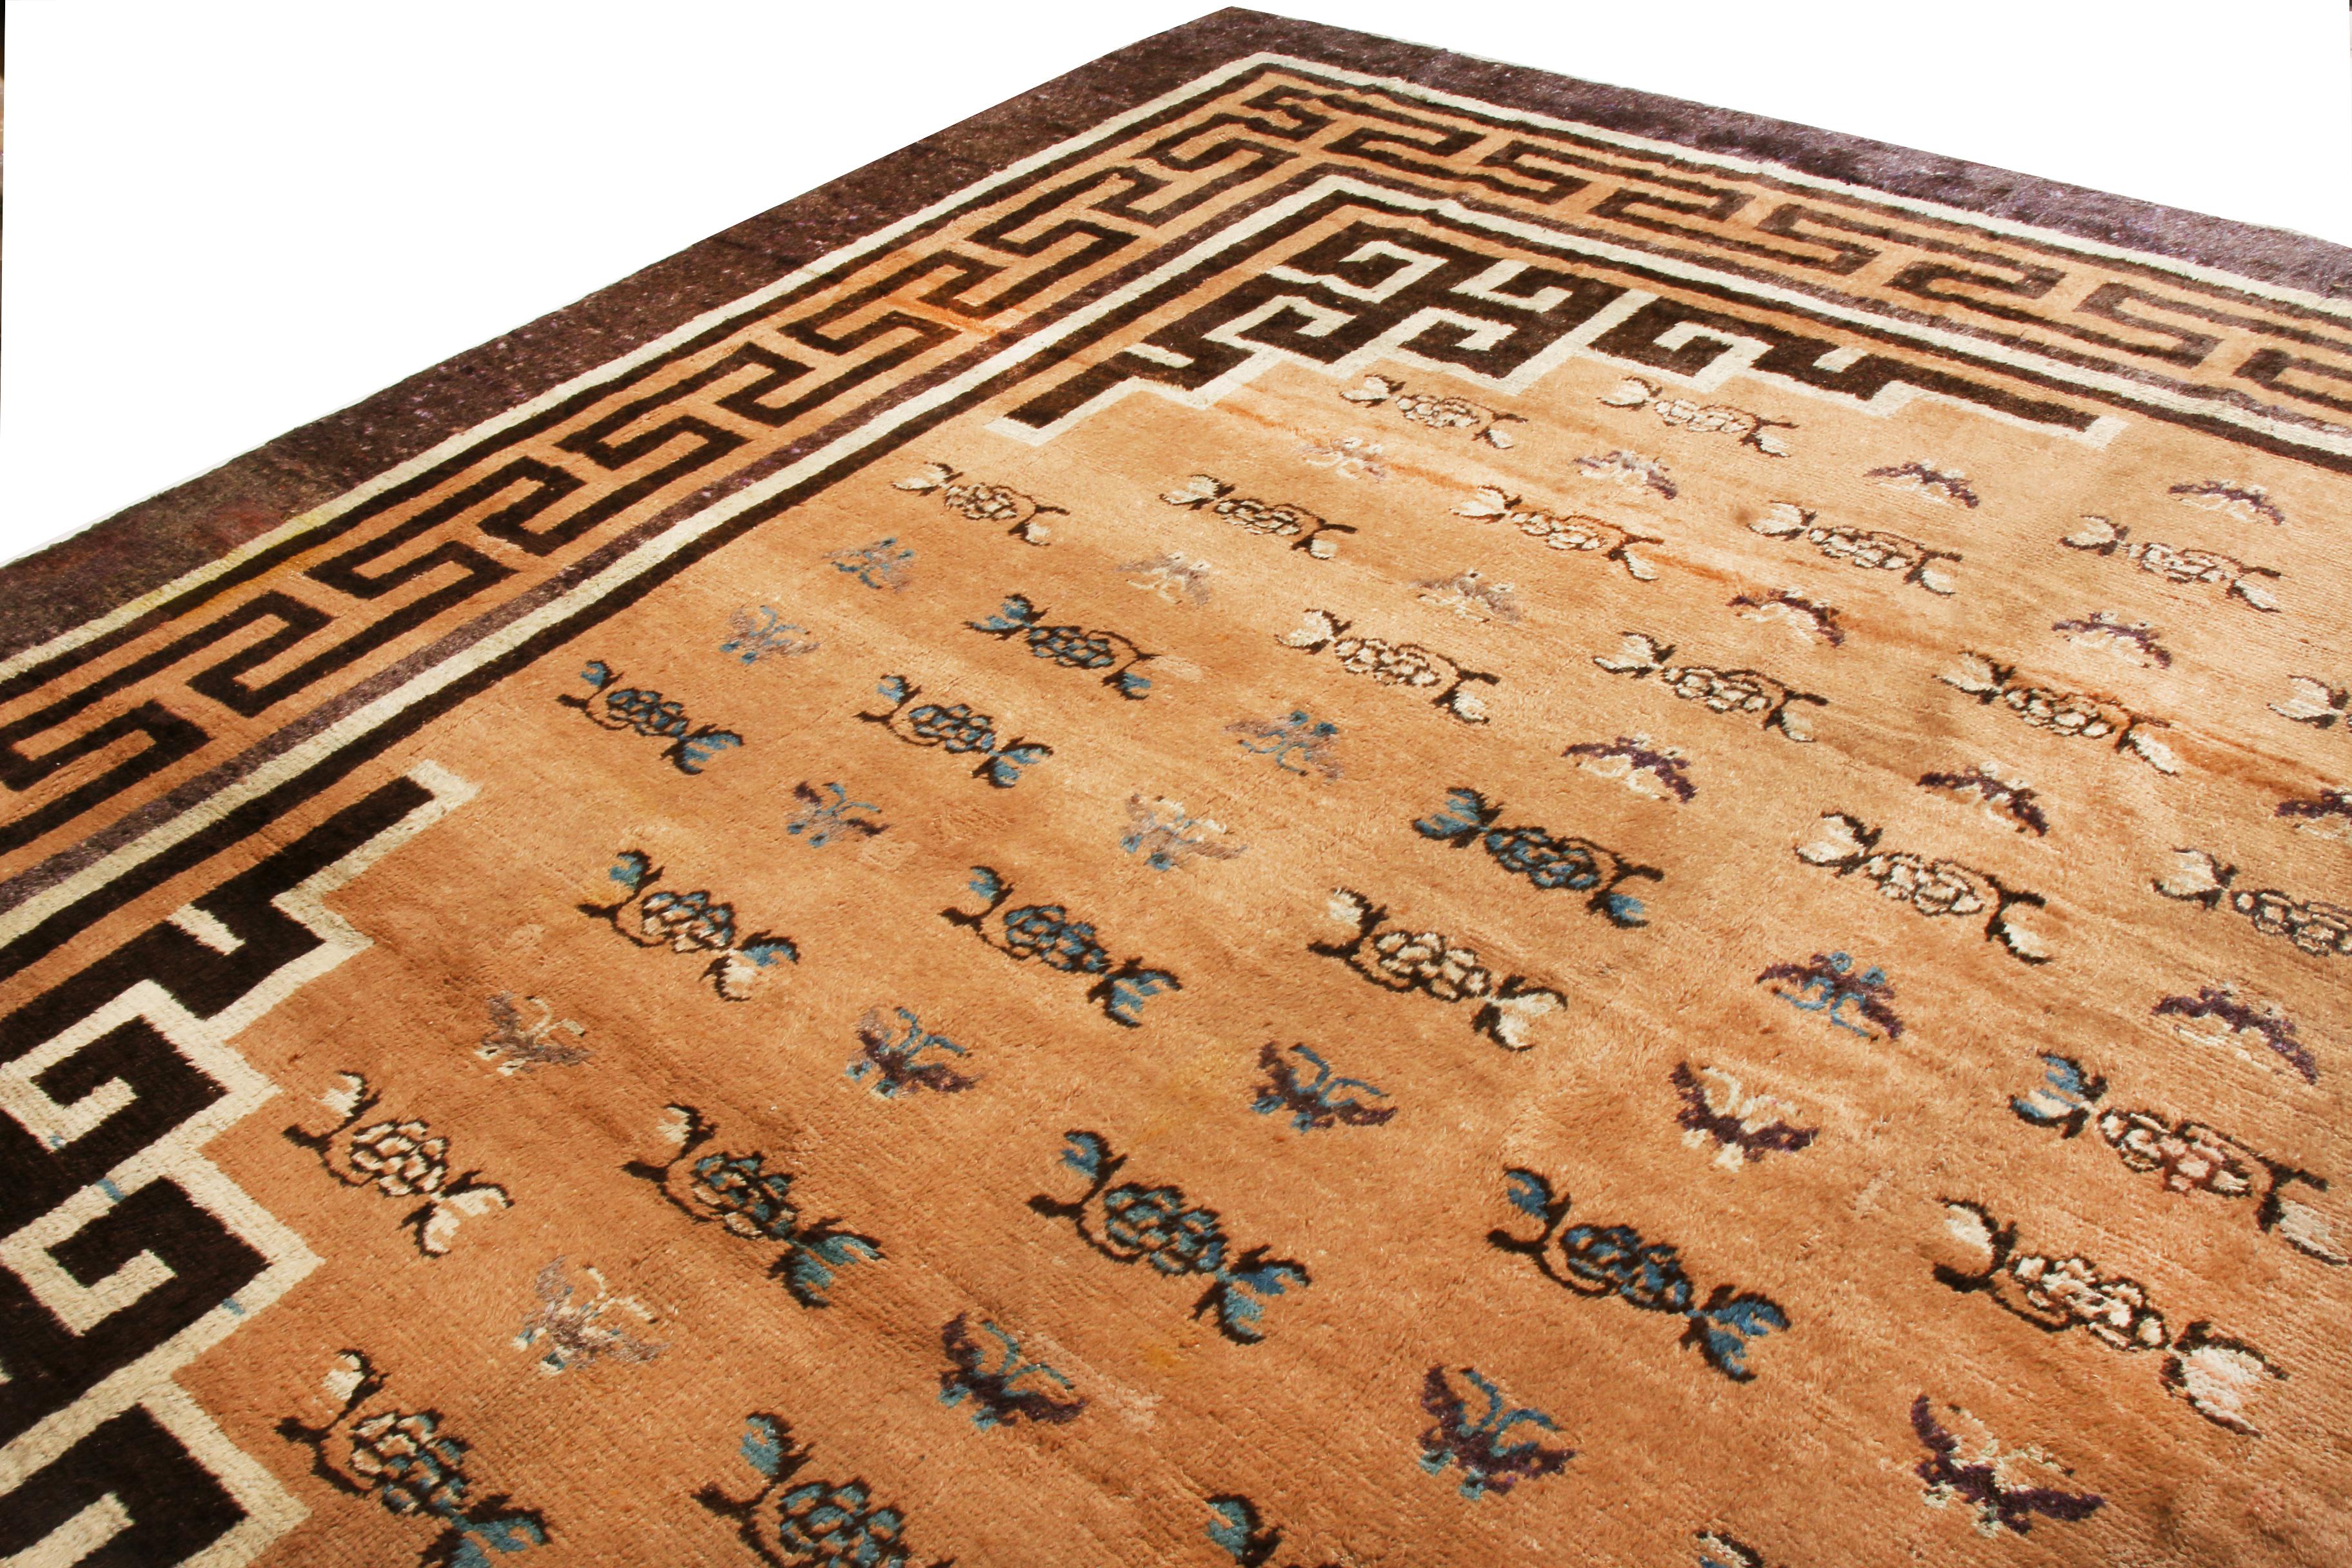 This antique transitional Mongolian wool rug has an all-over floral design with unique Chinese inspiration. From 1860-1870, the inner border features black, meandering right-angle characters, archaic Chinese symbols commonly seen in other oriental